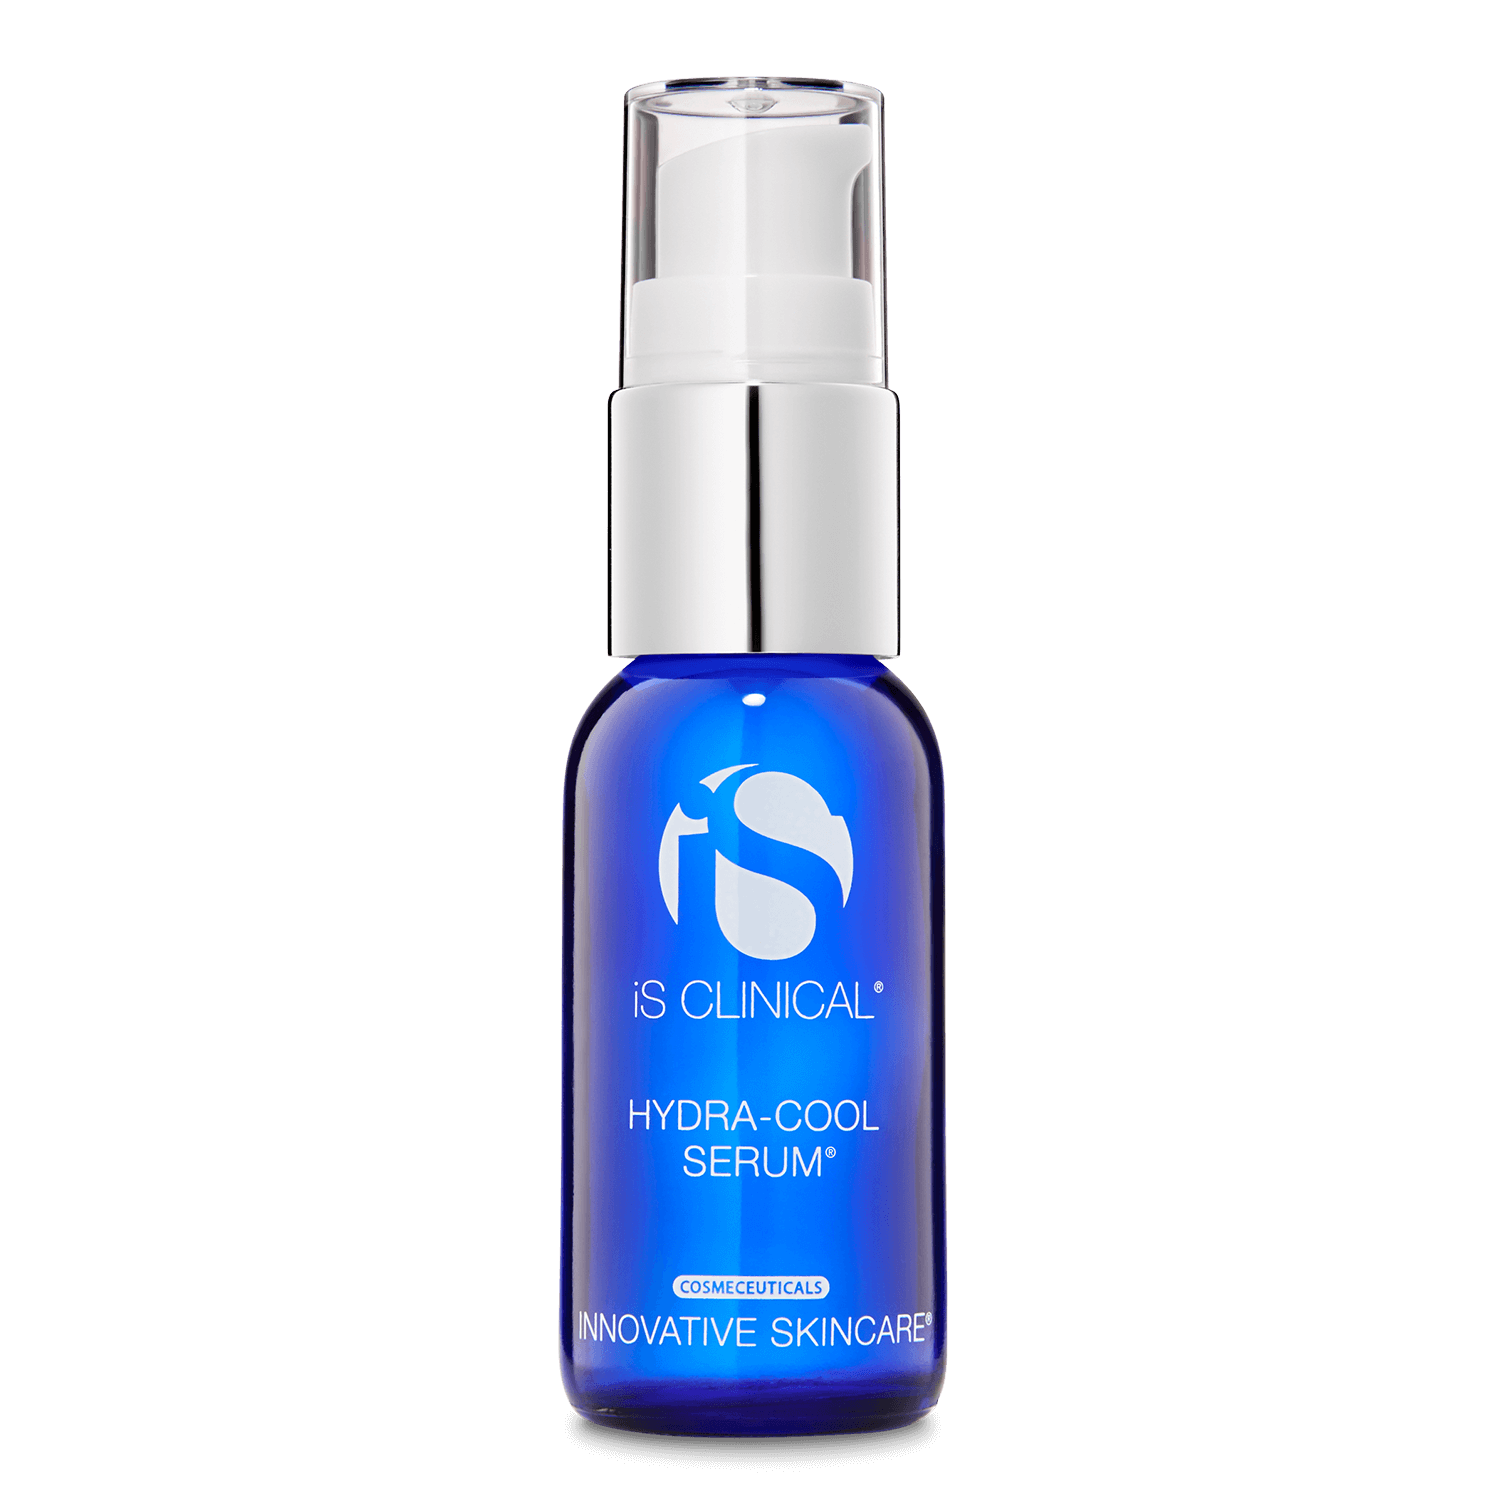 Hydra-Cool Serum by is clinical